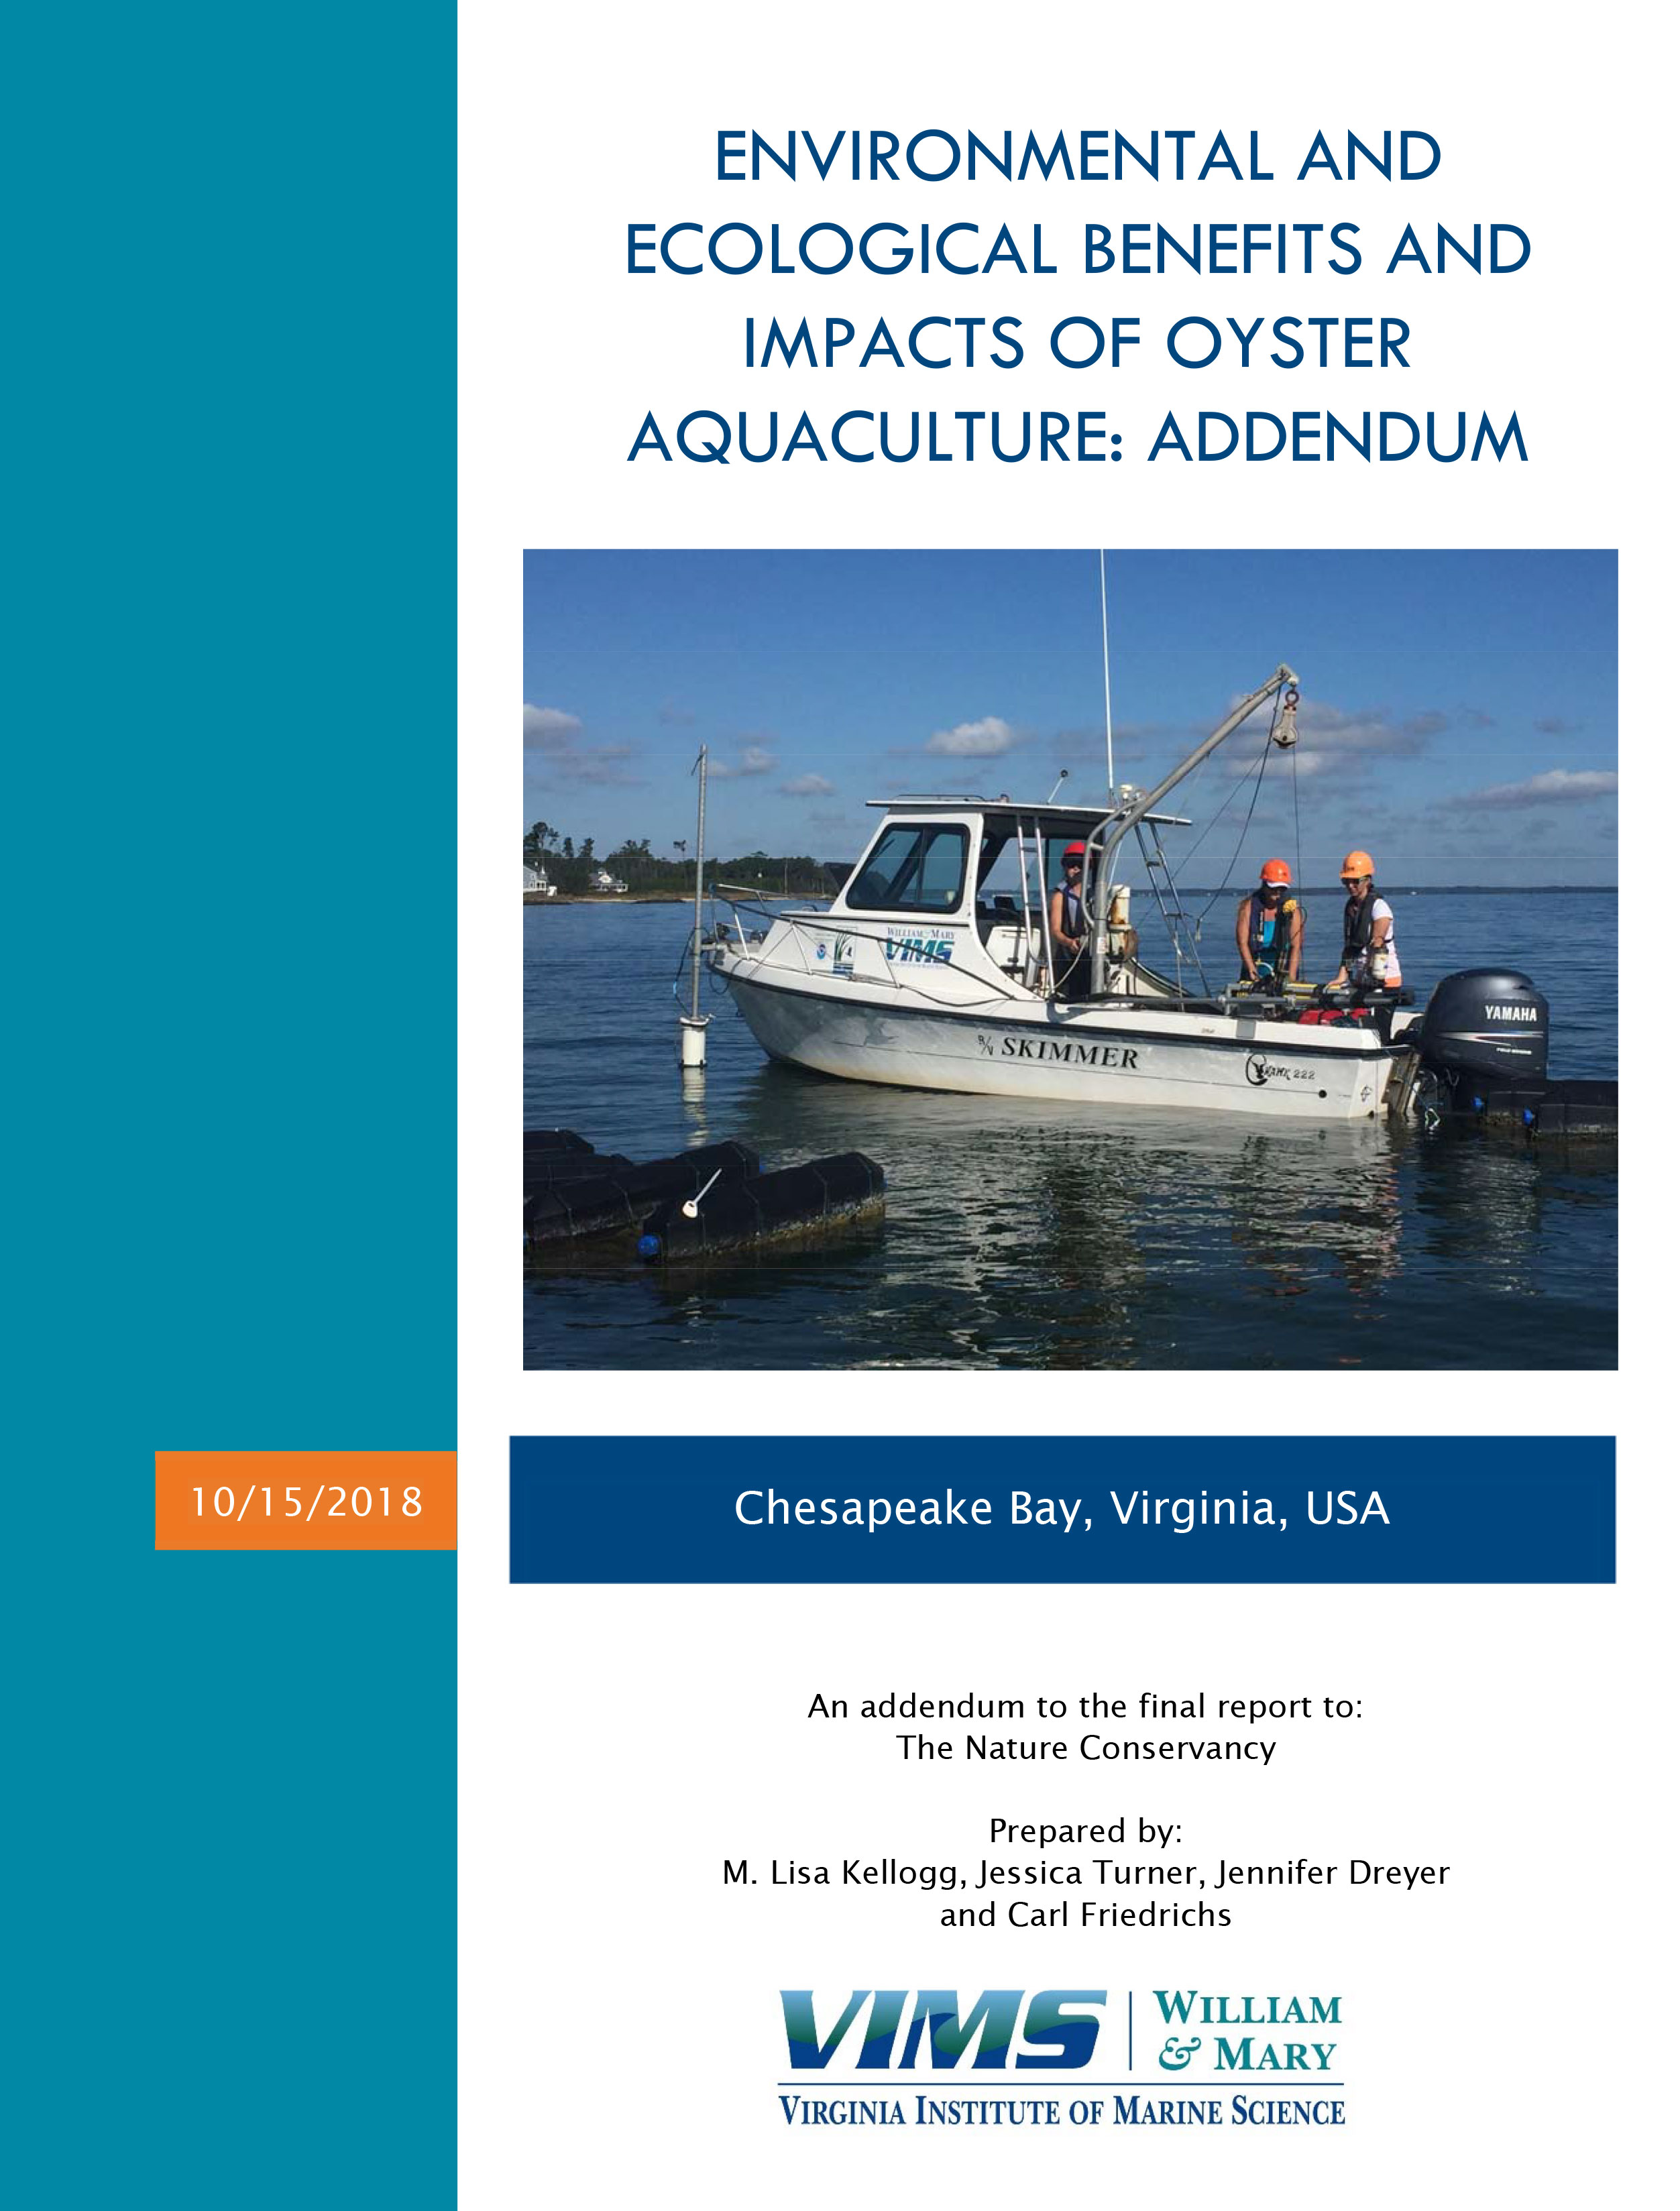 Addendum to final report on the environmental and ecological benefits and impacts of oyster aquaculture.